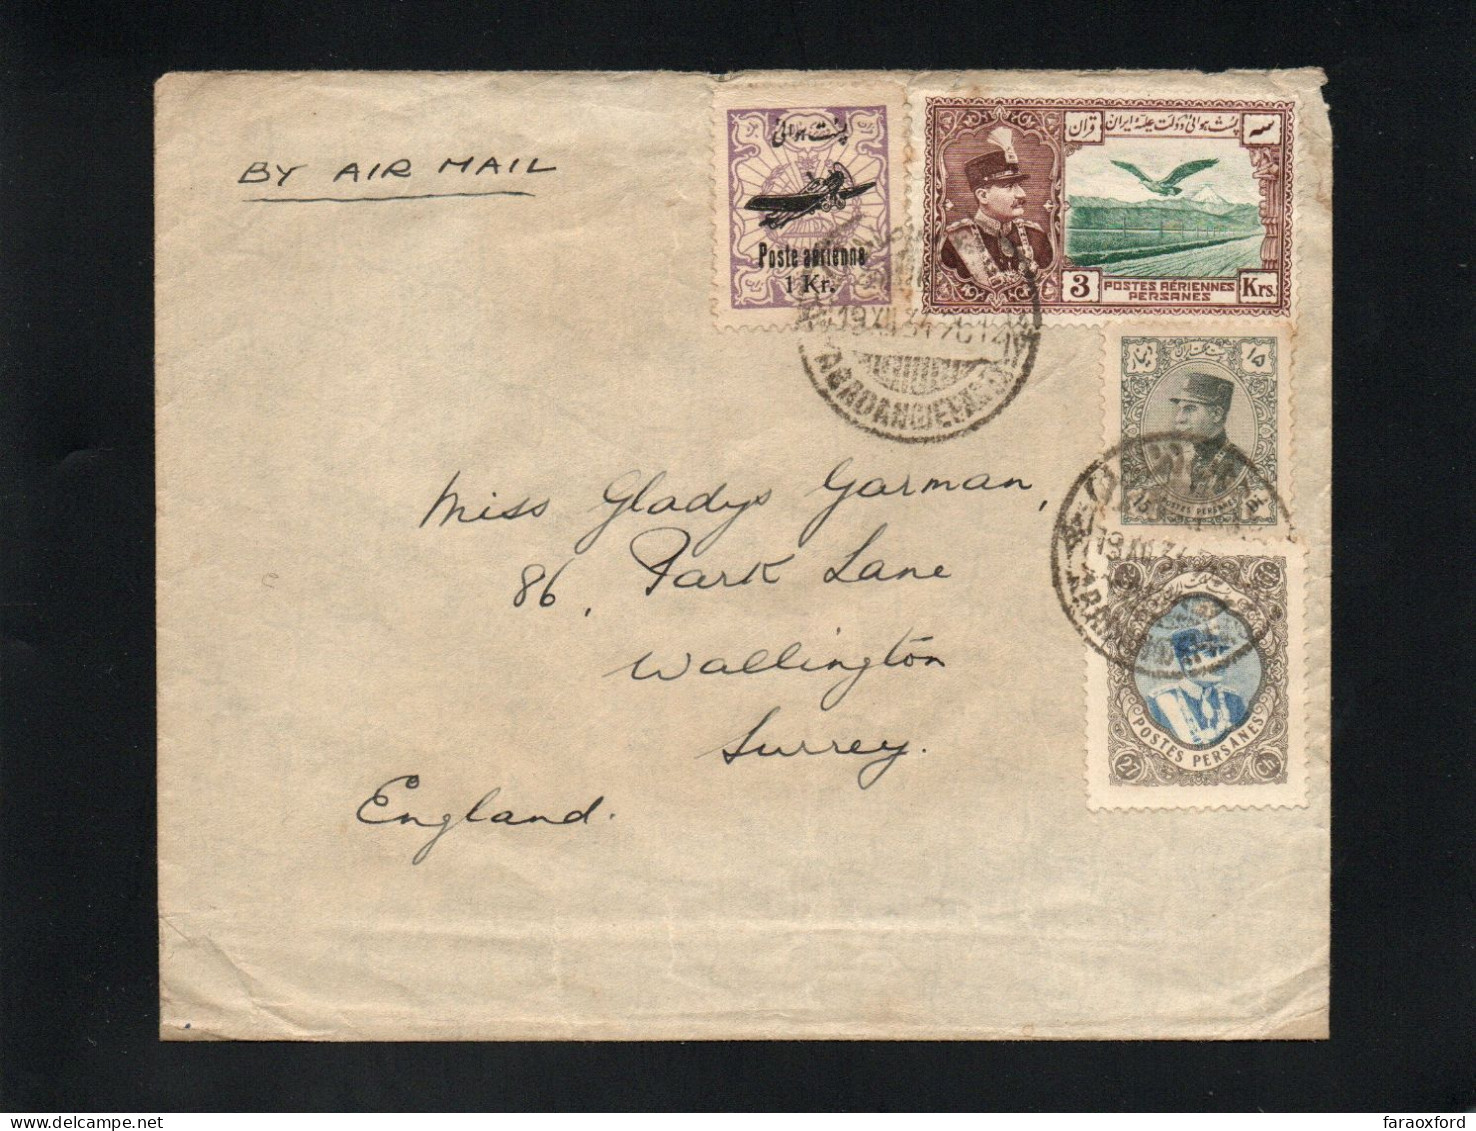 IRAN - ايران - PERSIA - 1934 - POSTAL HISTORY - HIGH VALUE AIR STAMPS ON COVER - WITH ABADAN CDS - Irán